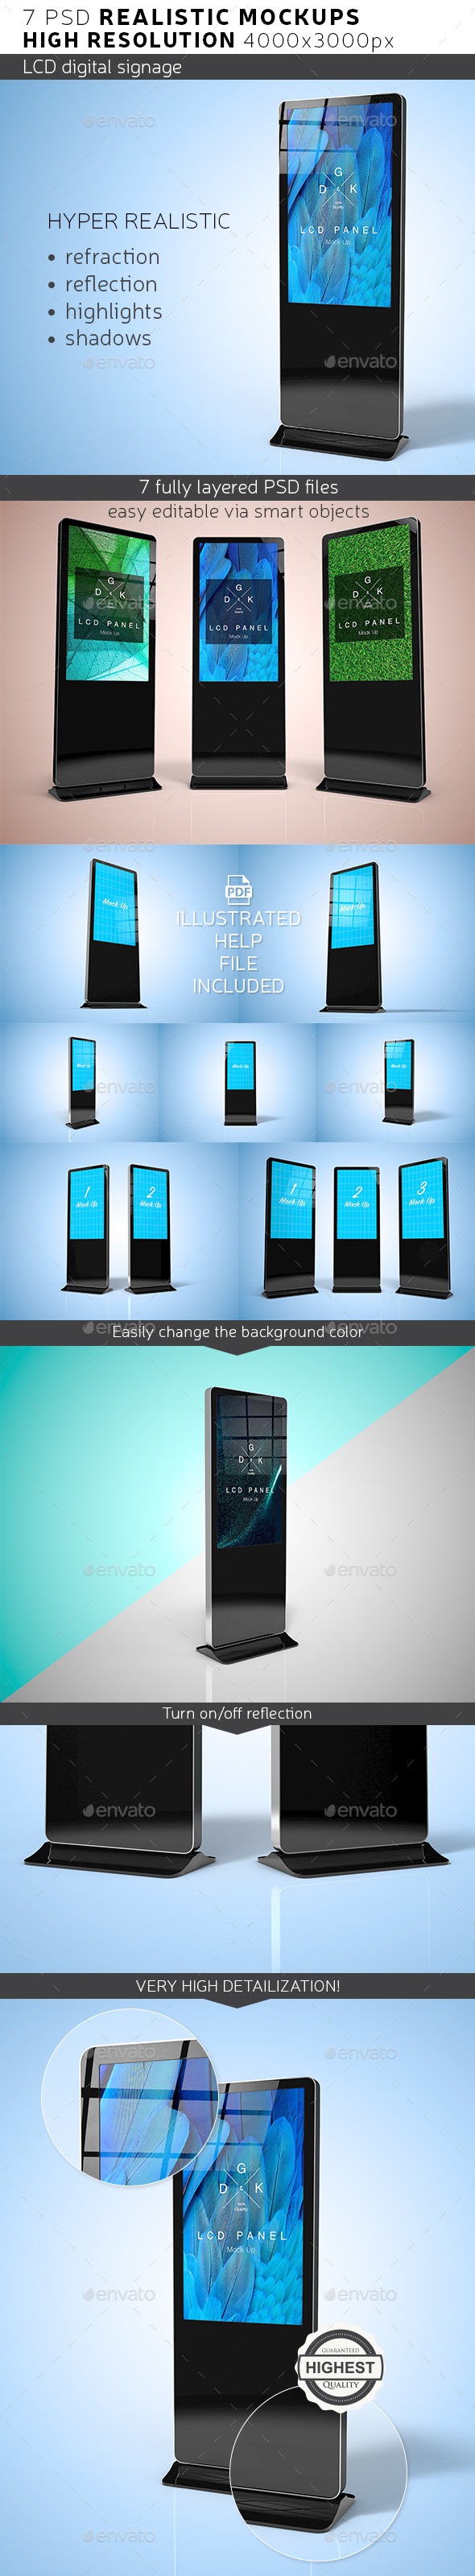 Download Signage Mockup Graphics Designs Templates From Graphicriver